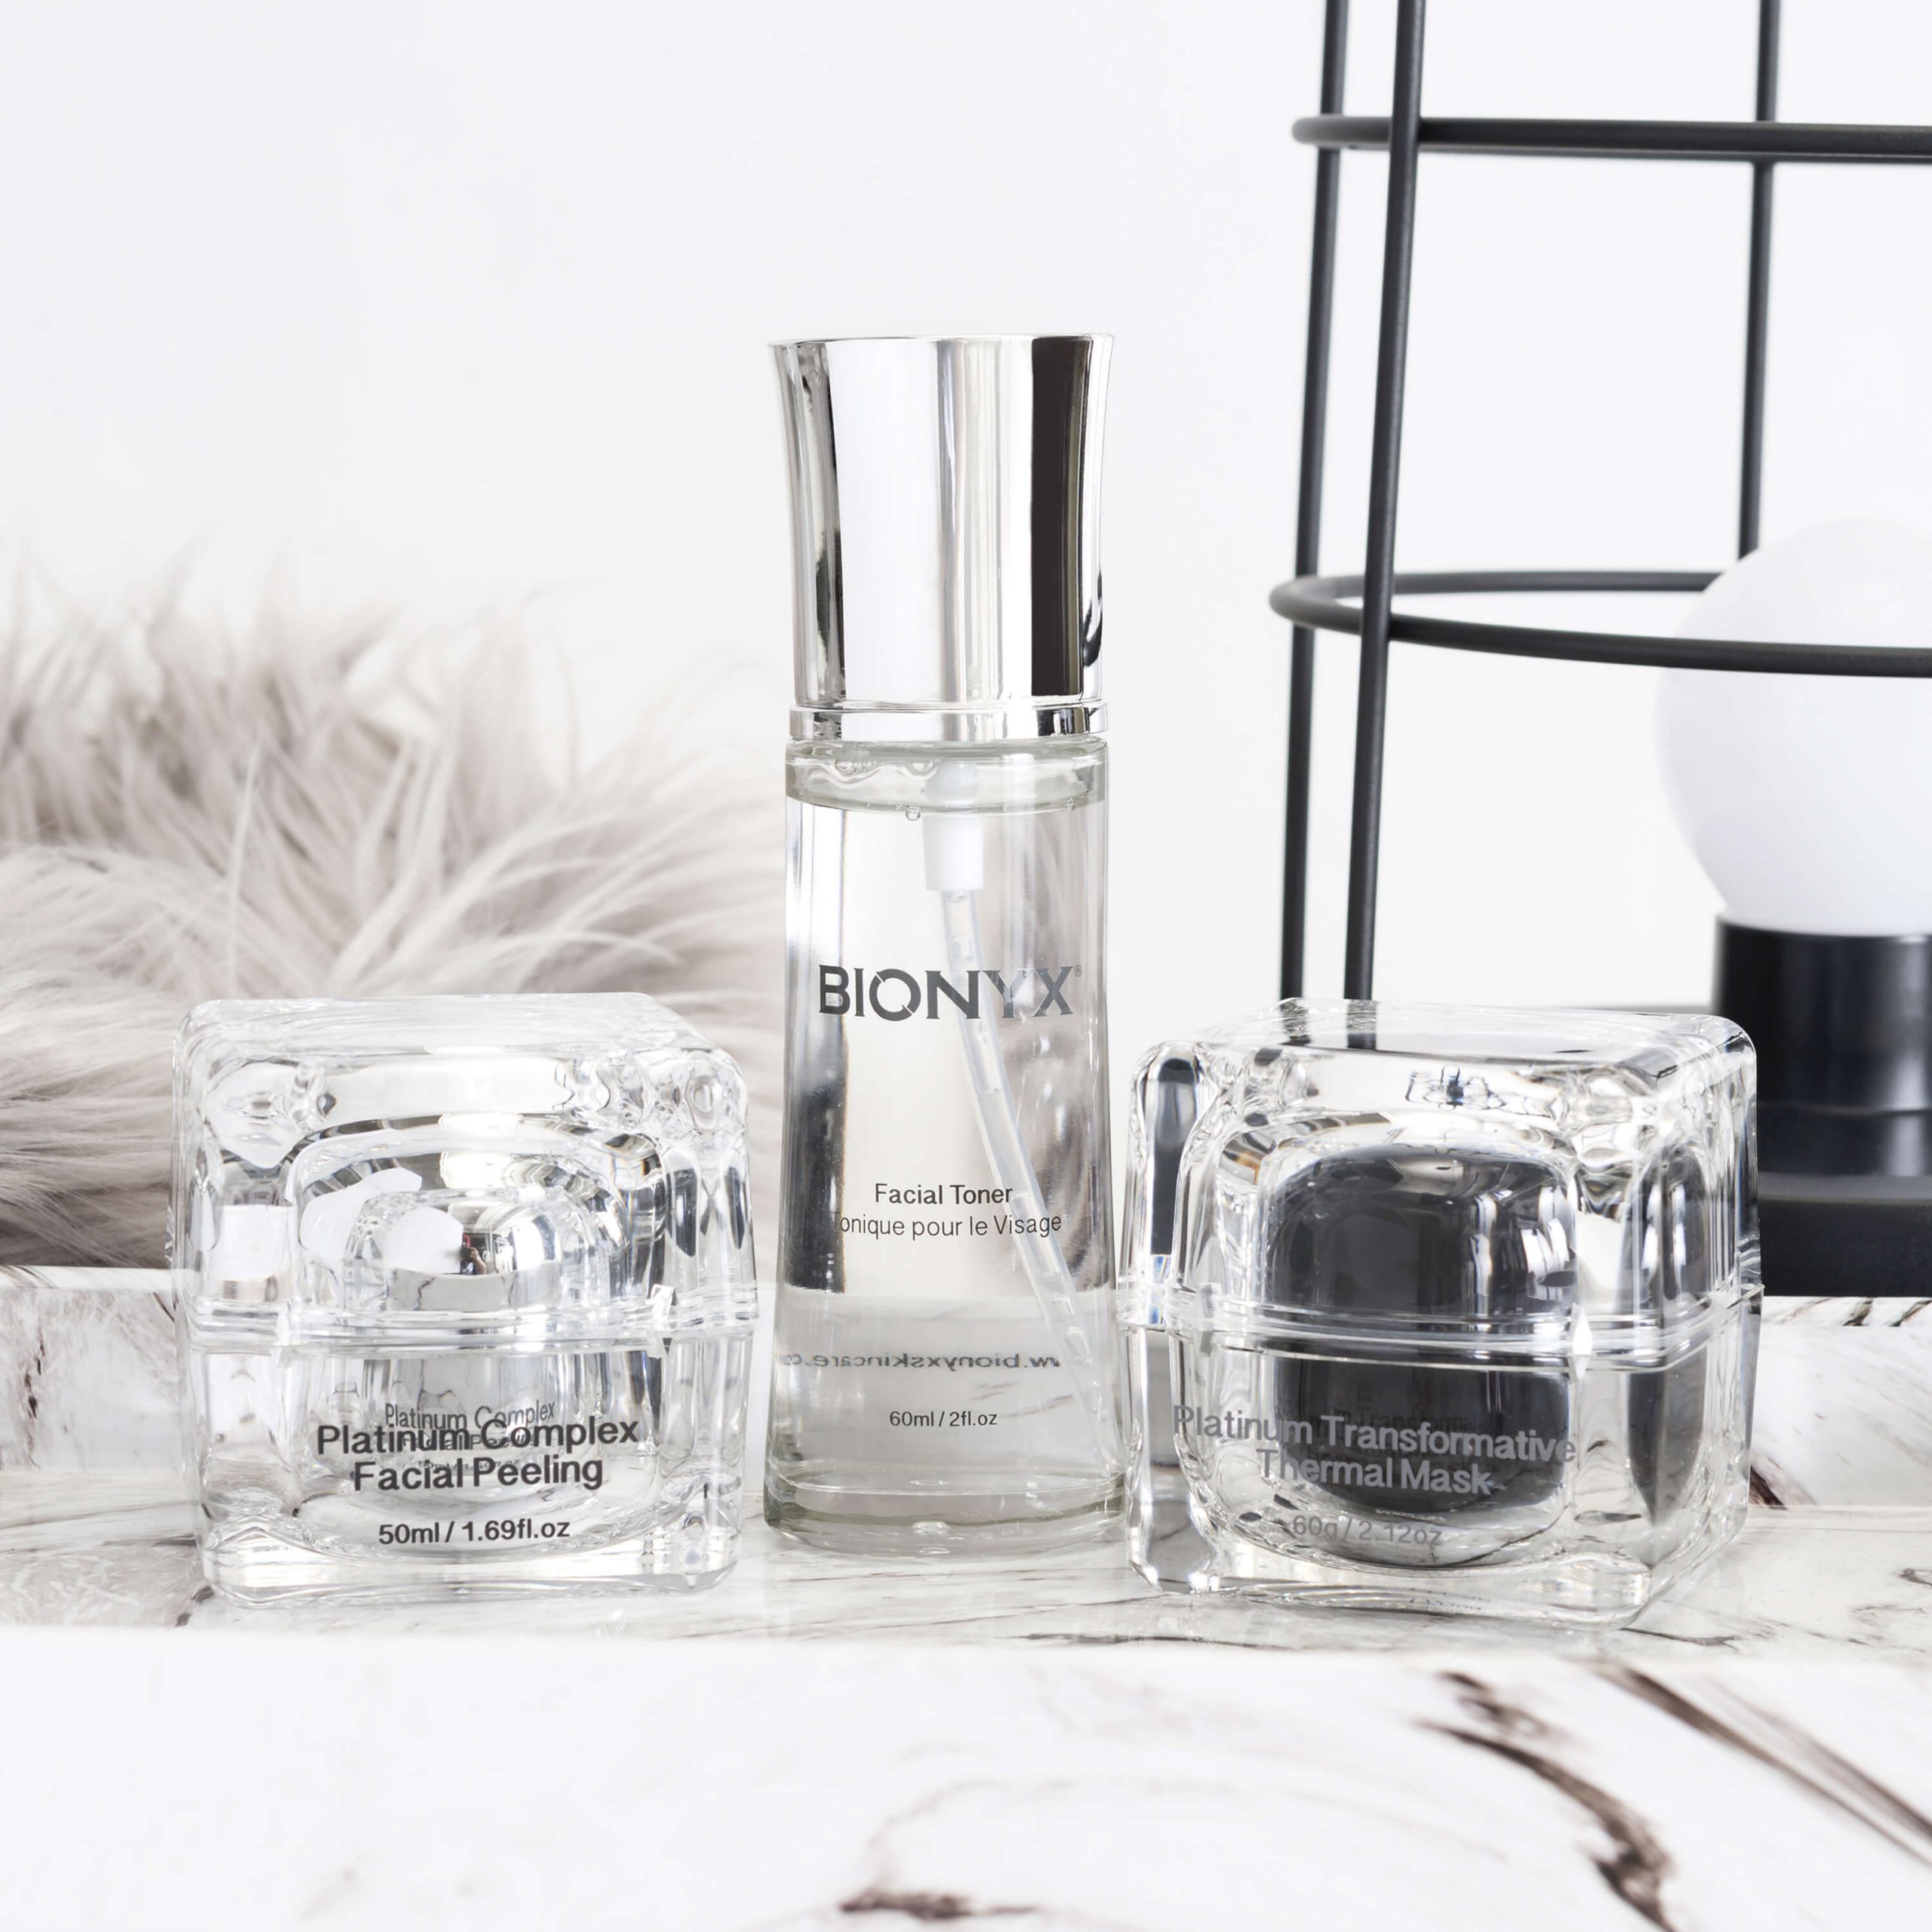 Bionyx skincare for fall products - Winter Skincare Routine Mistakes